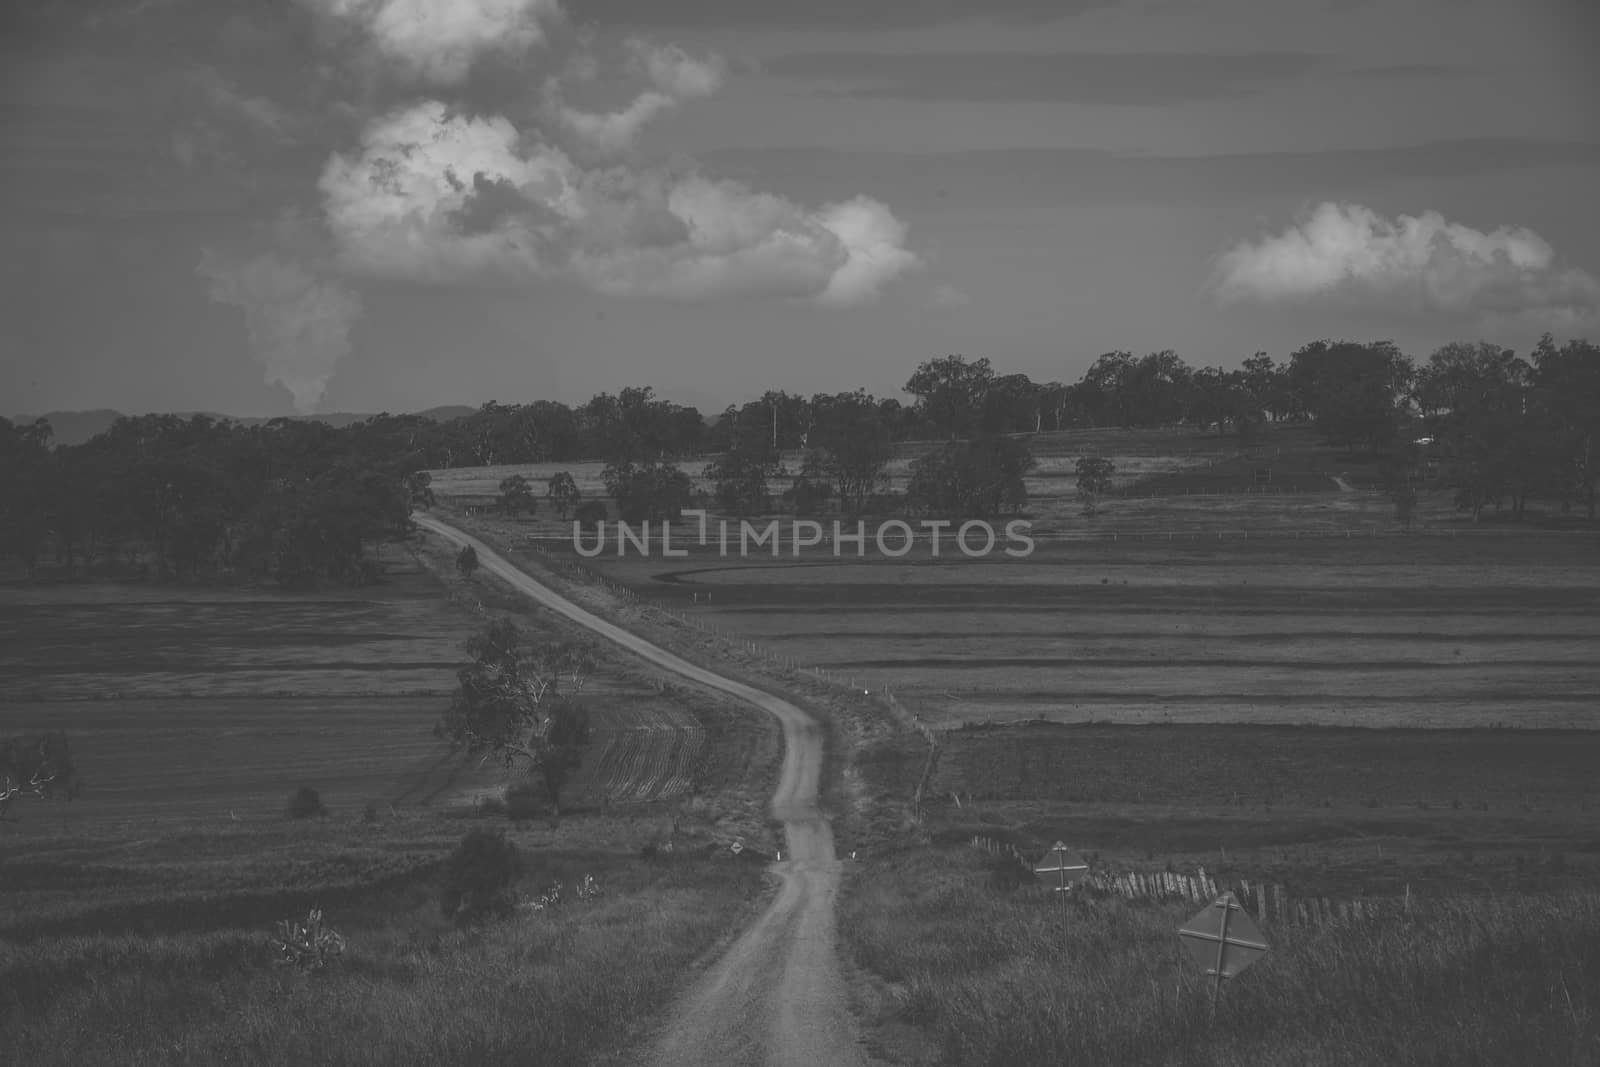 Country agricultural and farming field. by artistrobd